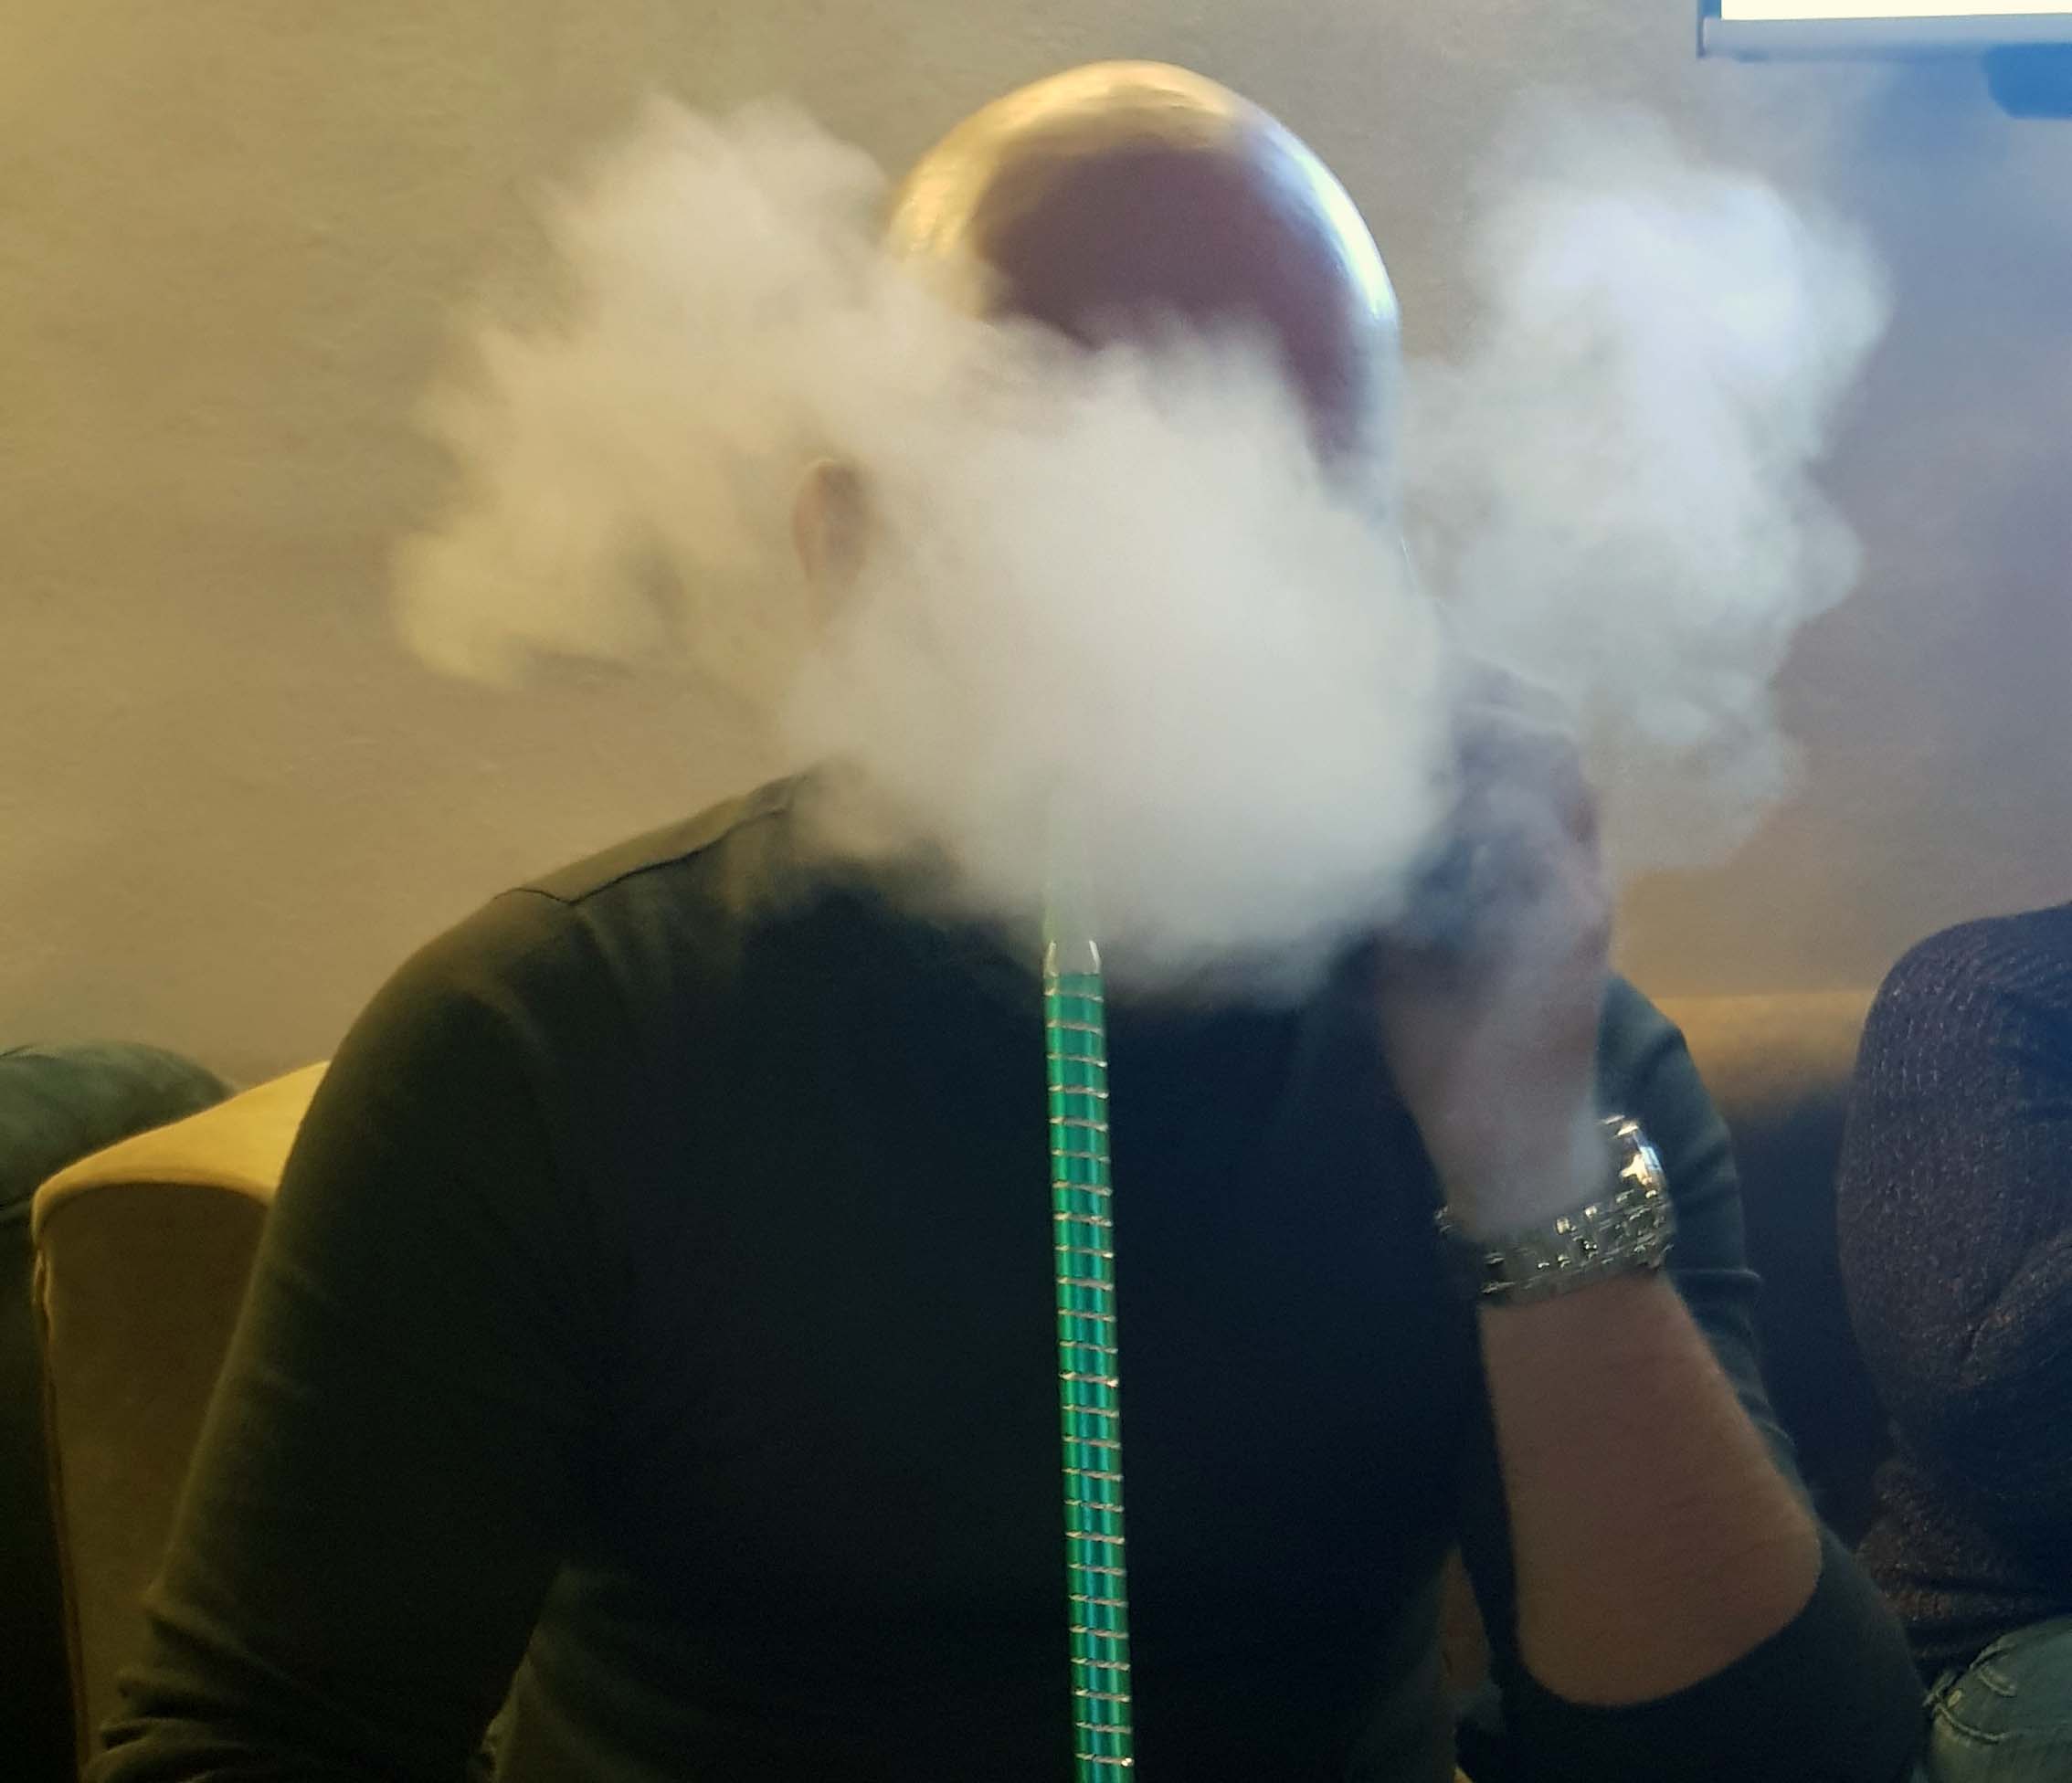 The WHO that an hour-long shisha session was equivalent to smoking 100-200 cigarettes